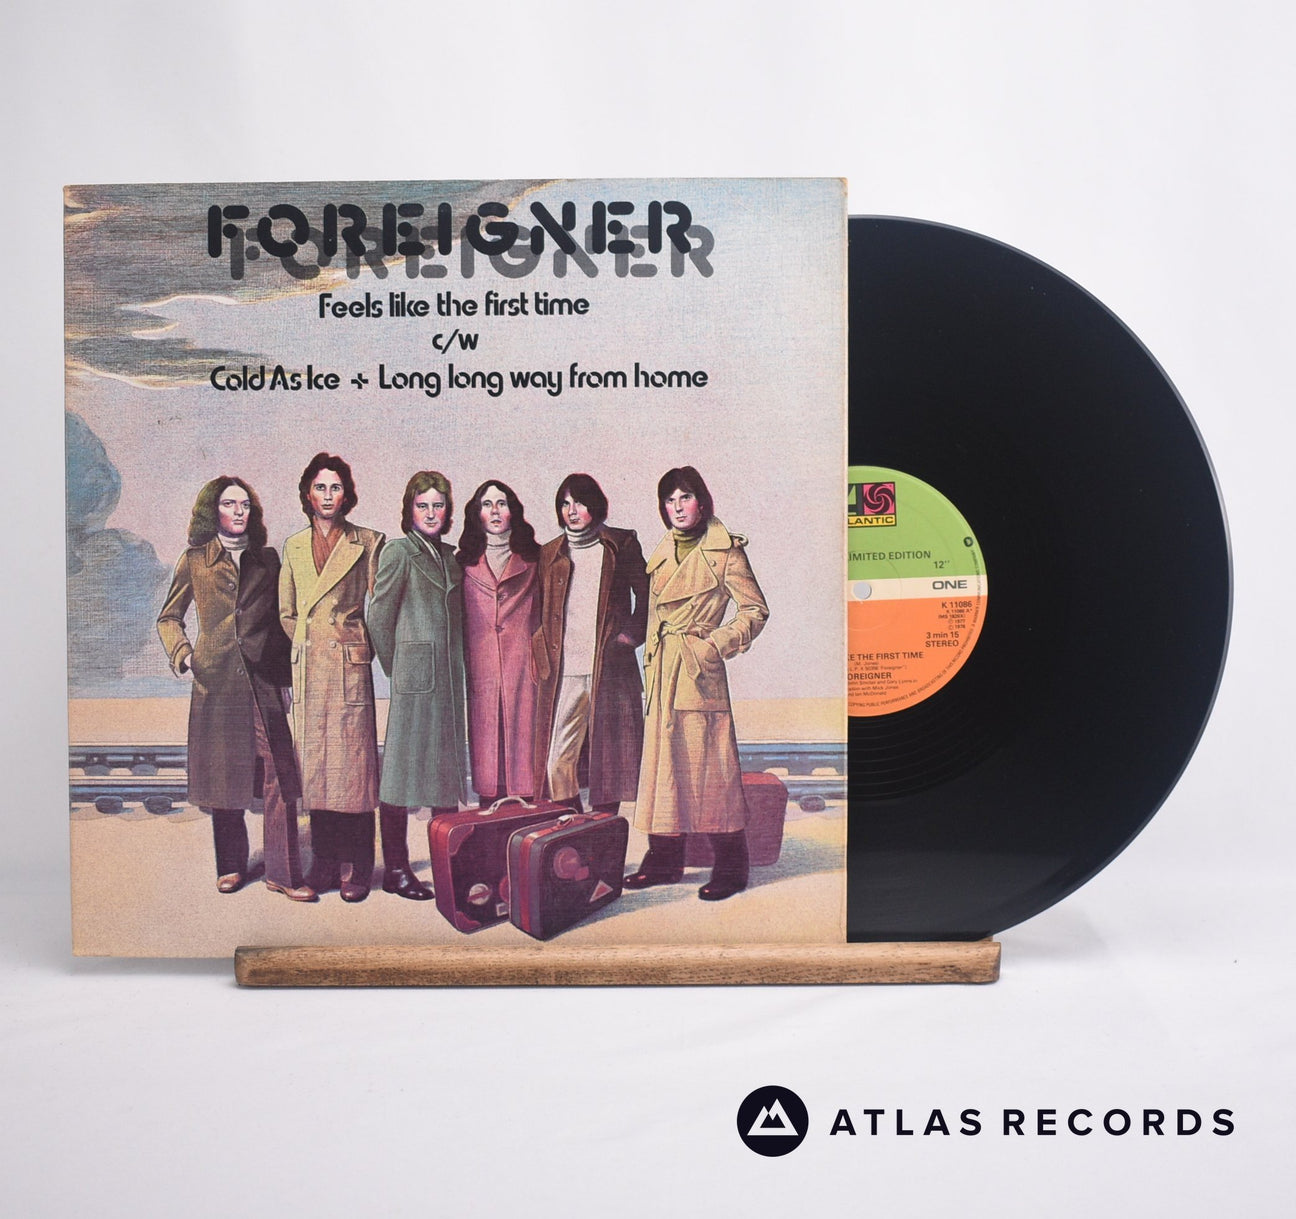 Foreigner Feels Like The First Time 12" Vinyl Record - Front Cover & Record